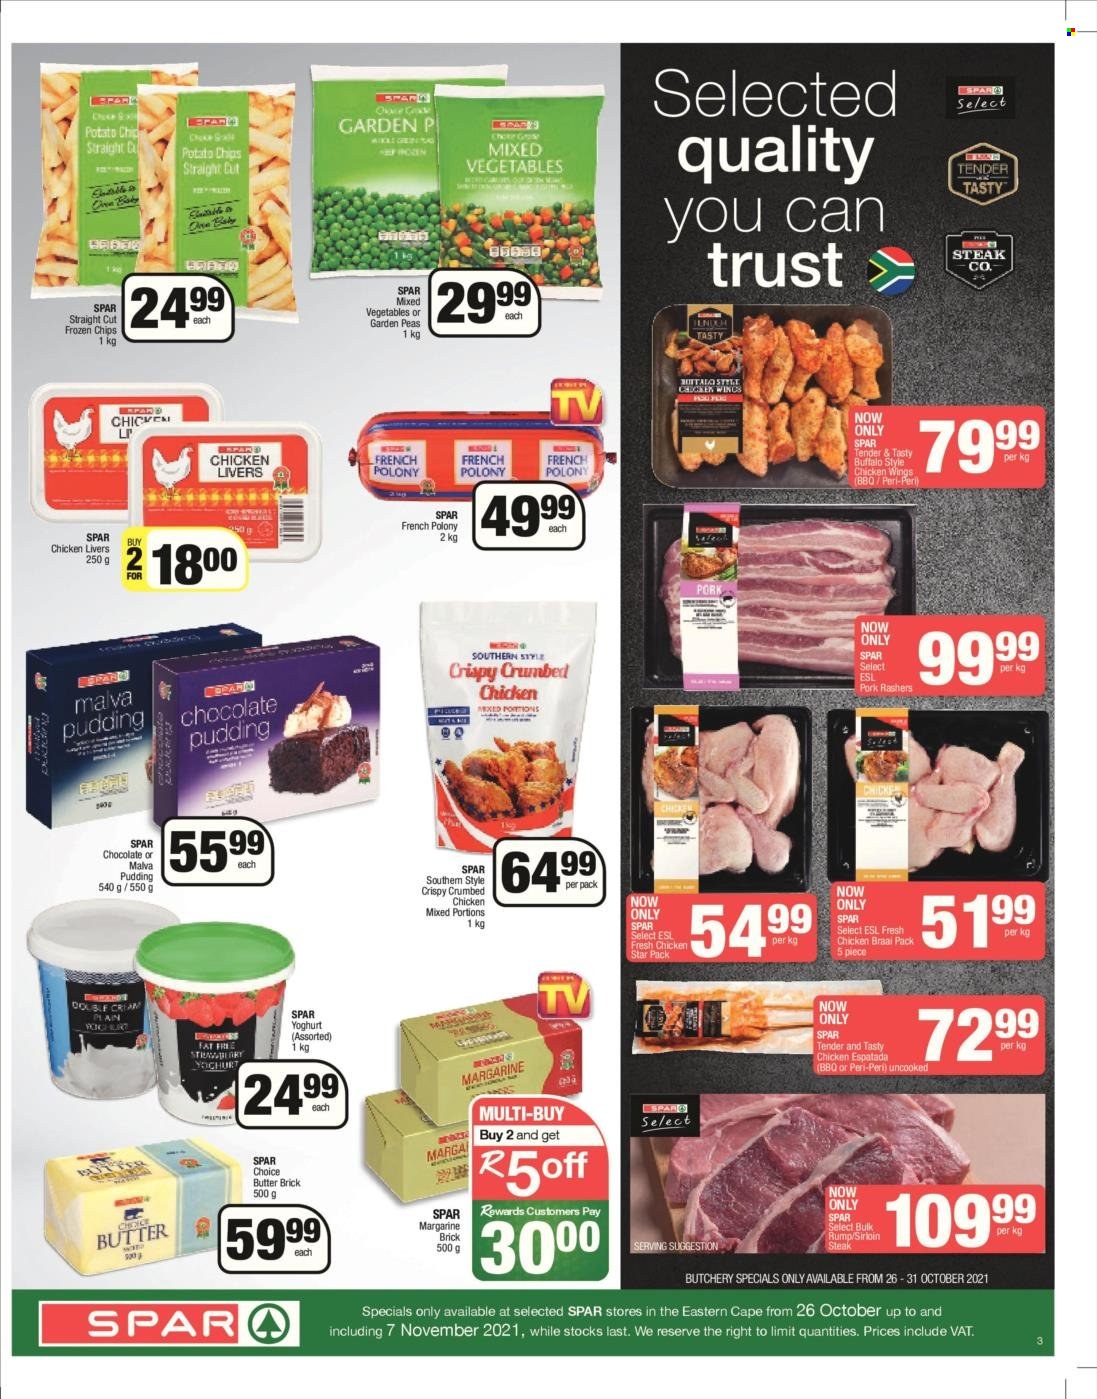 SPAR catalogue  - 25/10/2021 - 07/11/2021 - Sales products - peas, french polony, rashers, polony, pudding, chocolate pudding, yoghurt, butter, margarine, mixed vegetables, frozen chips, chocolate, chicken livers, chicken meat, beef sirloin, steak, sirloin steak. Page 2.